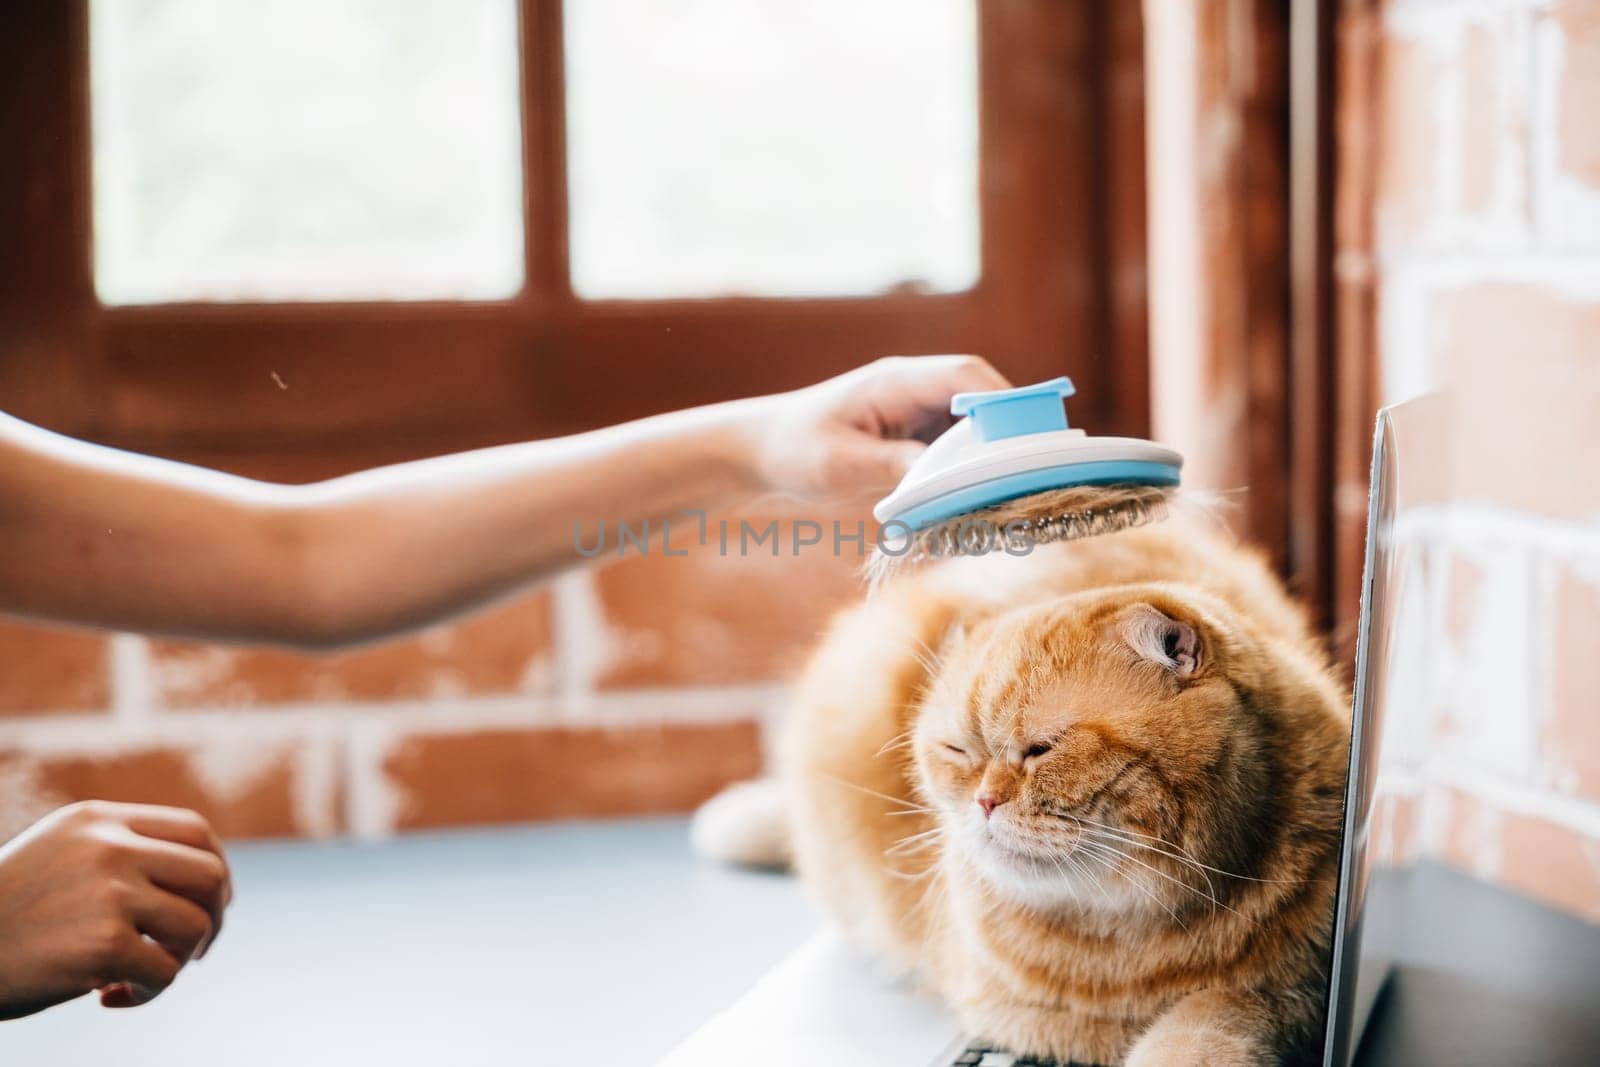 Owner's care, A woman enjoys grooming her Scottish Fold cat, who dreams peacefully during the grooming session. Their bond is evident in this relaxed and enjoyable scene. Pat love routine by Sorapop